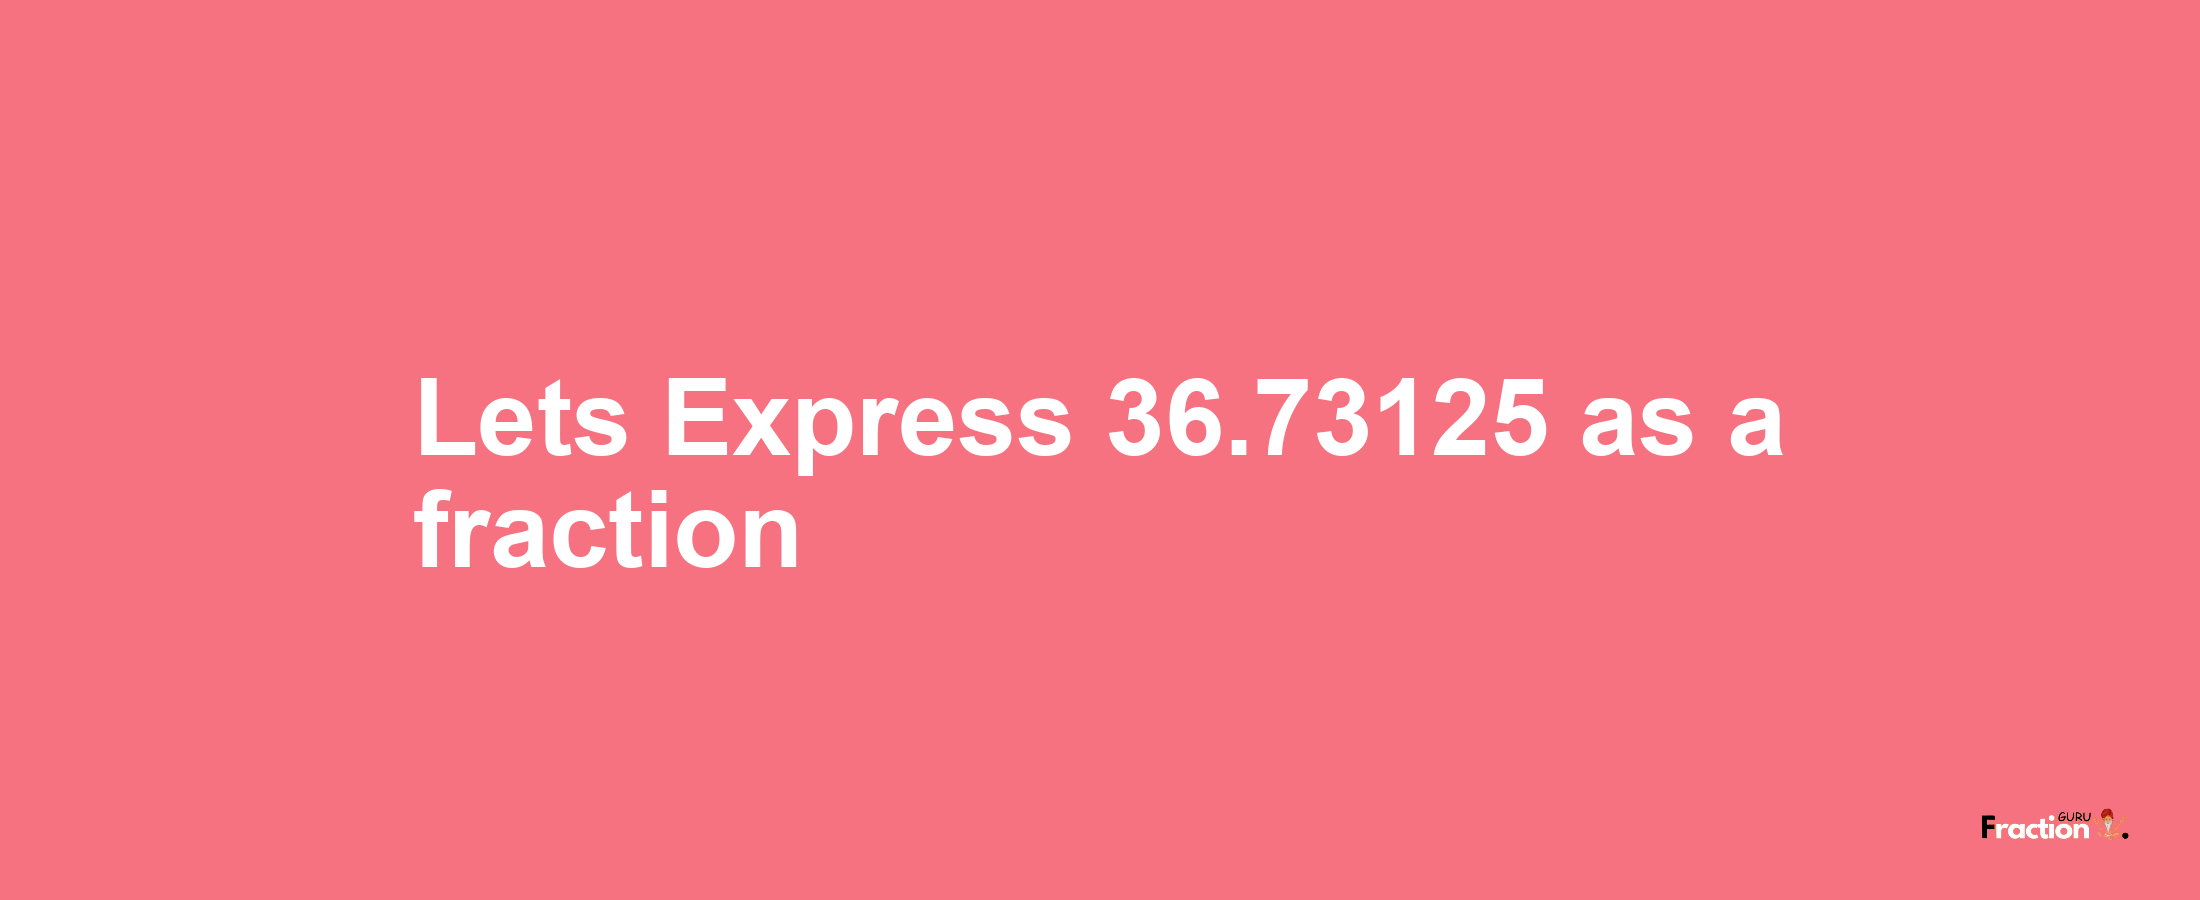 Lets Express 36.73125 as afraction